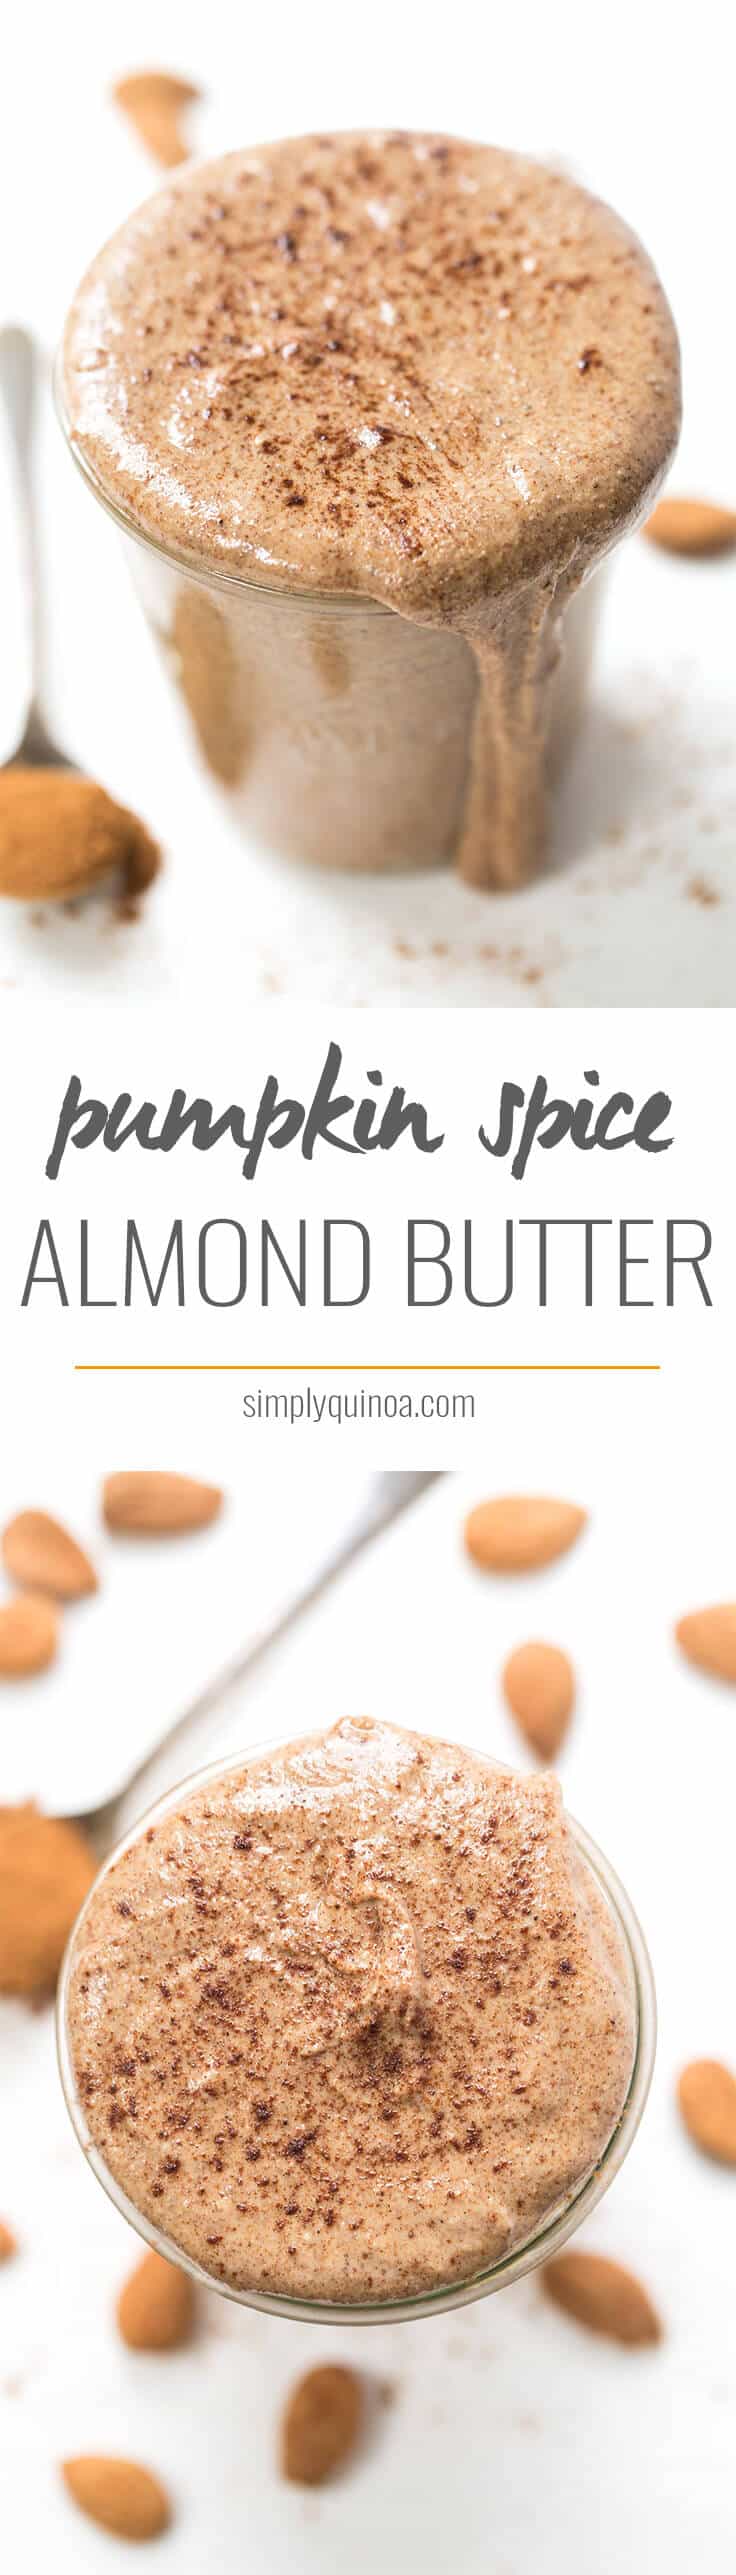 PUMPKIN SPICE ALMOND BUTTER -- love this fall spin on my fave nut butter of all time! This would be so good on toast with a little pumpkin butter on top!